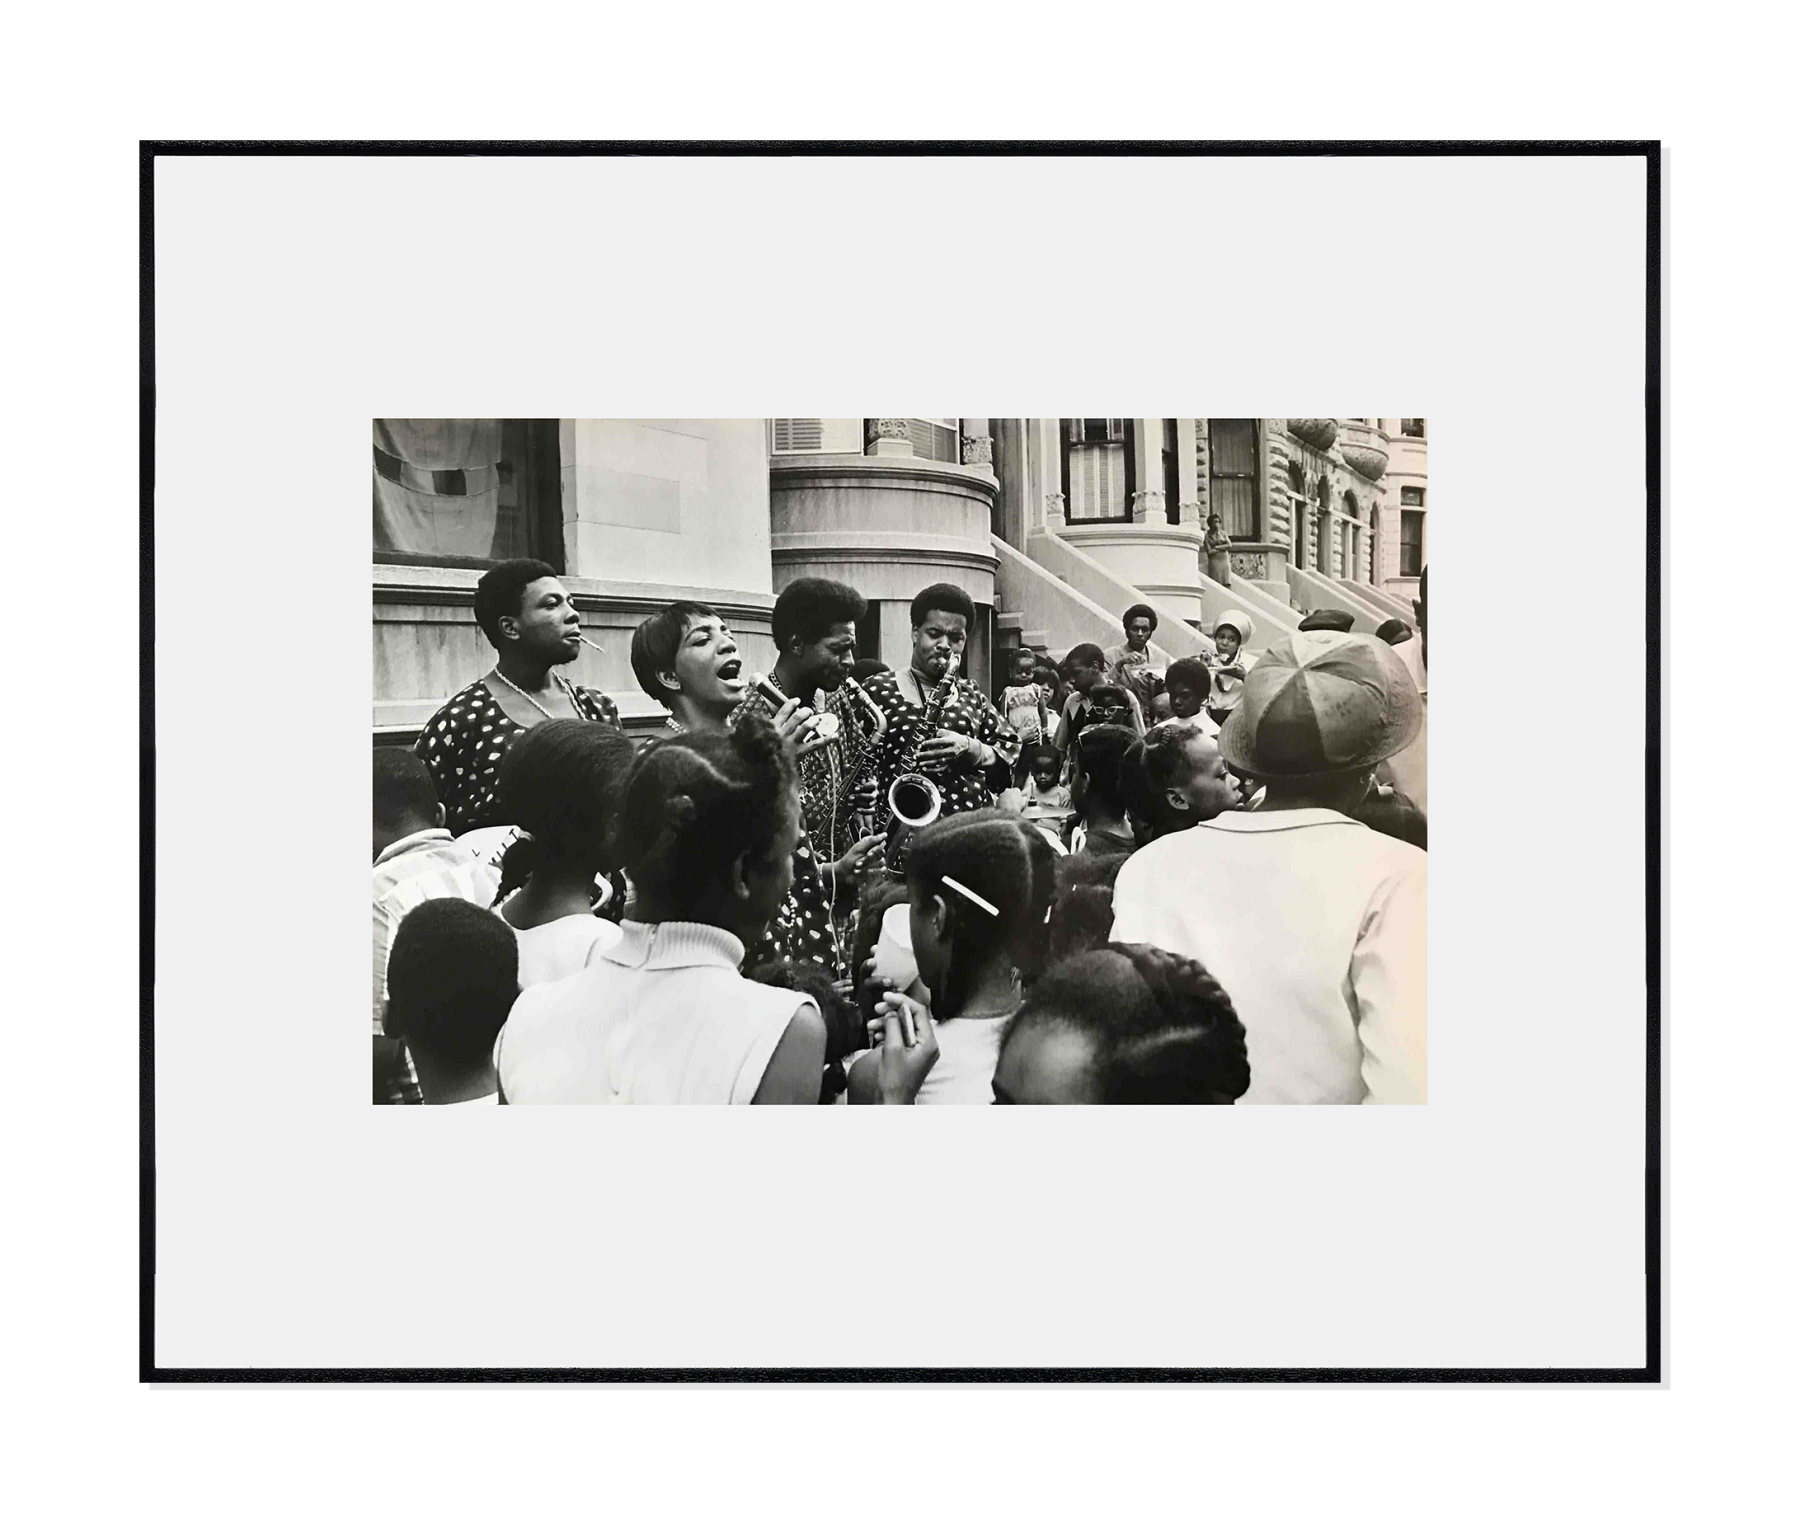 Block Party&nbsp;(from Deep South/New York City Life), circa 1973

Vintage silver gelatin print
Image: 20.3 x 30.5 cm /&nbsp;8 x 12 in.